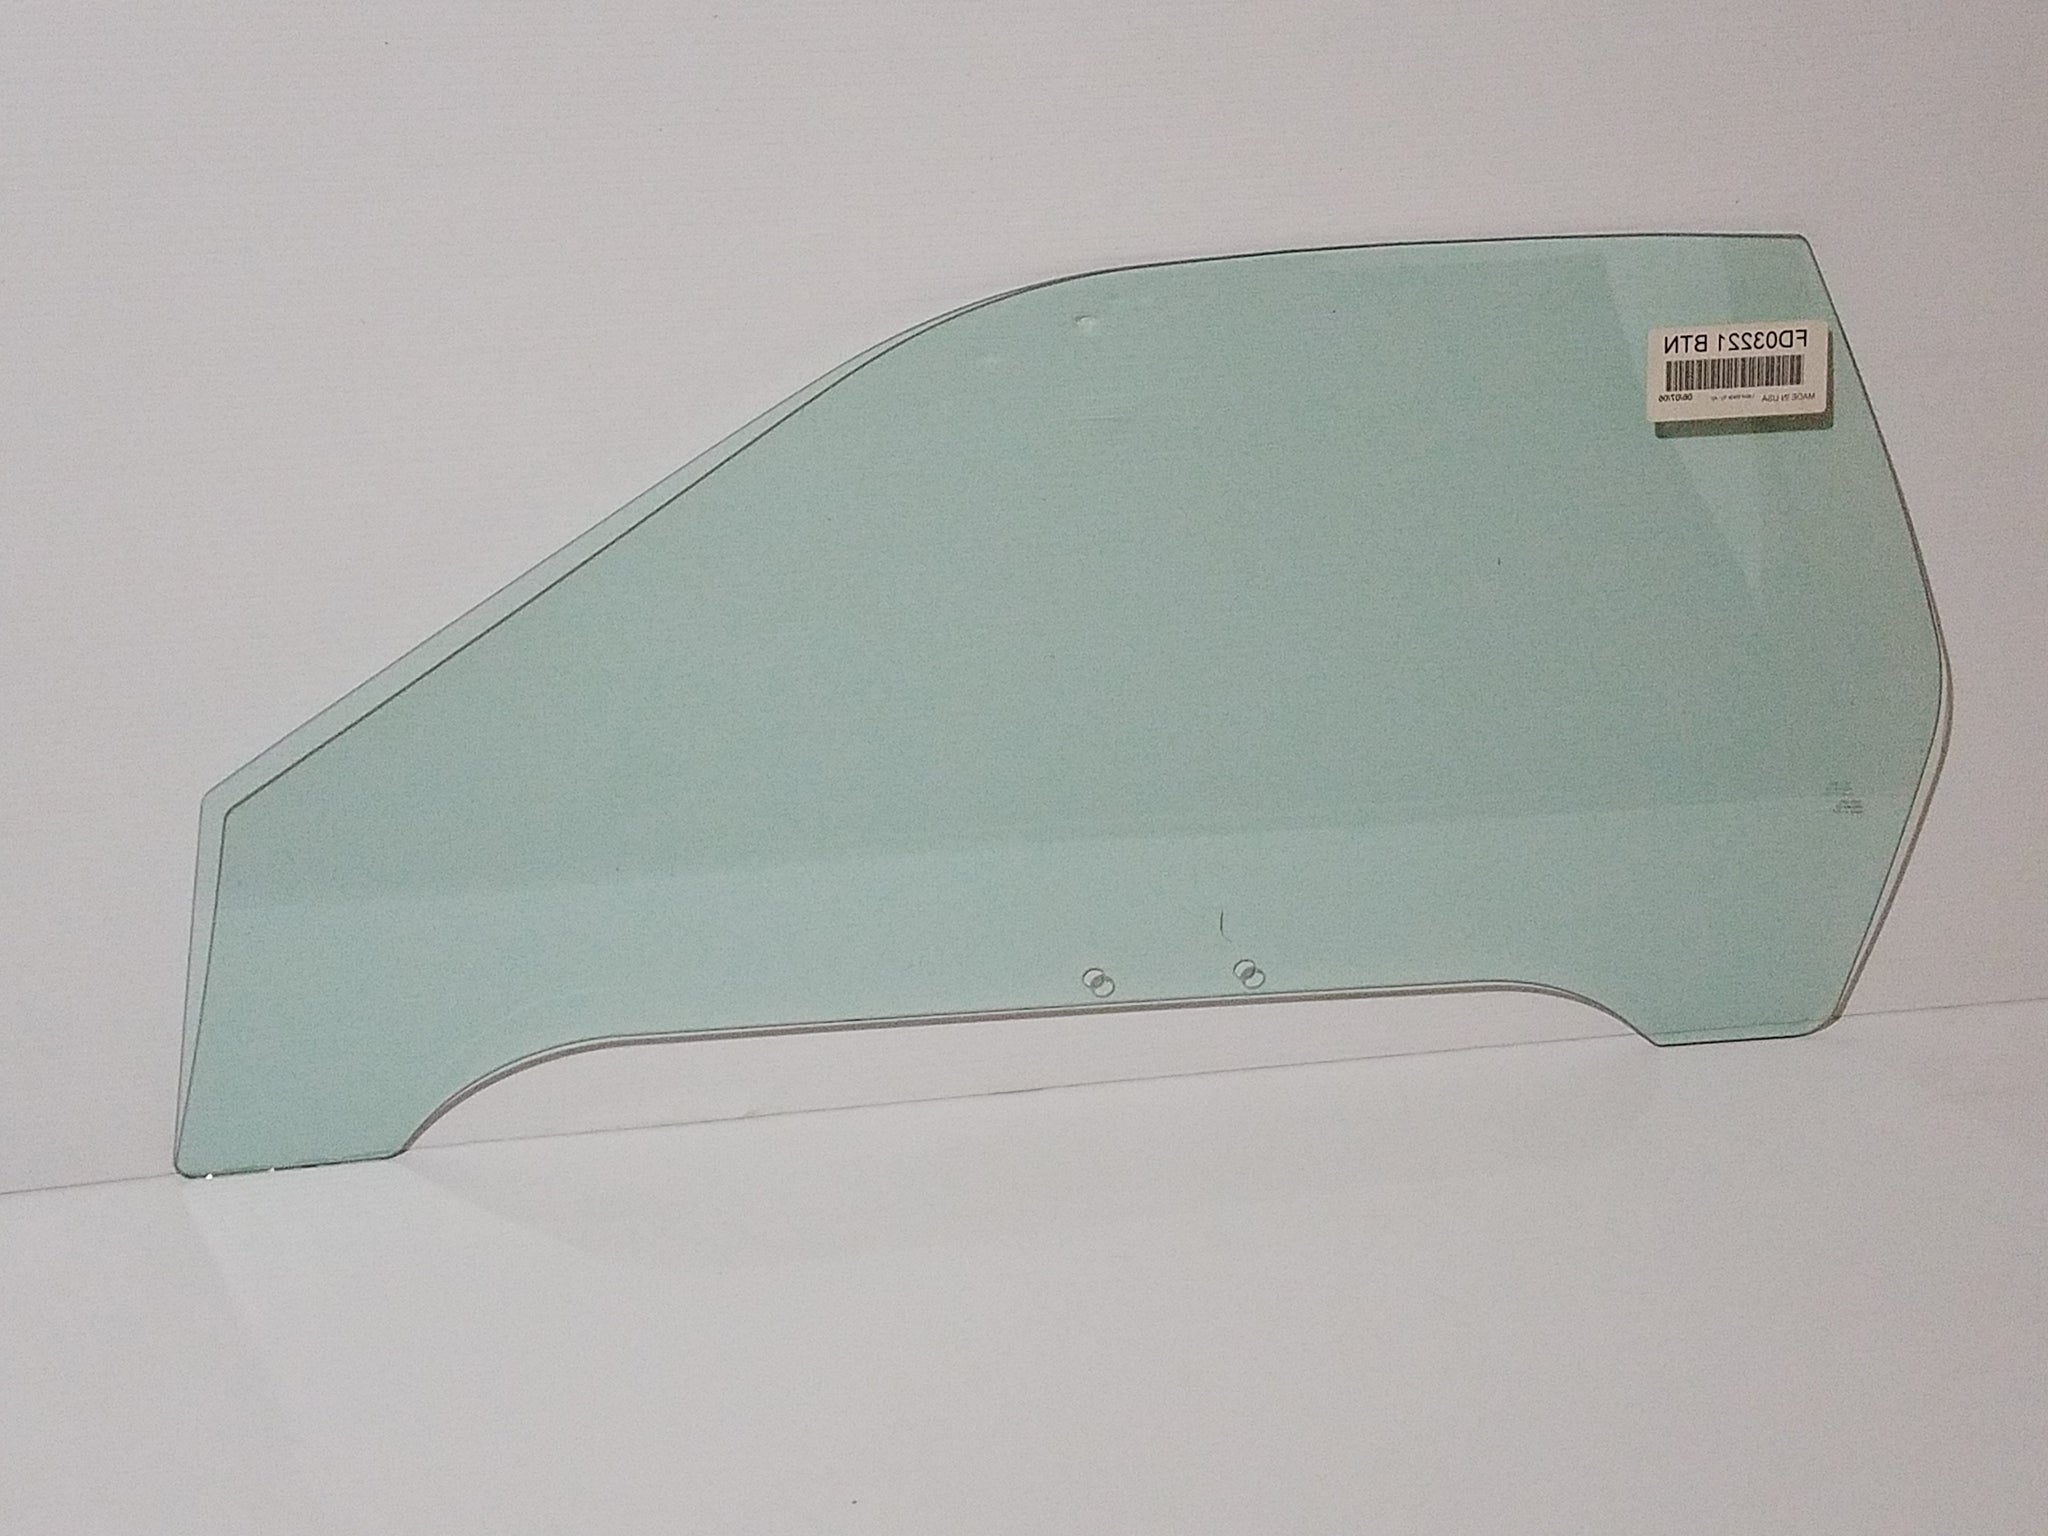 1986-1991 Mazda RX7 Coupe Driver's Door Glass, Blue Tint